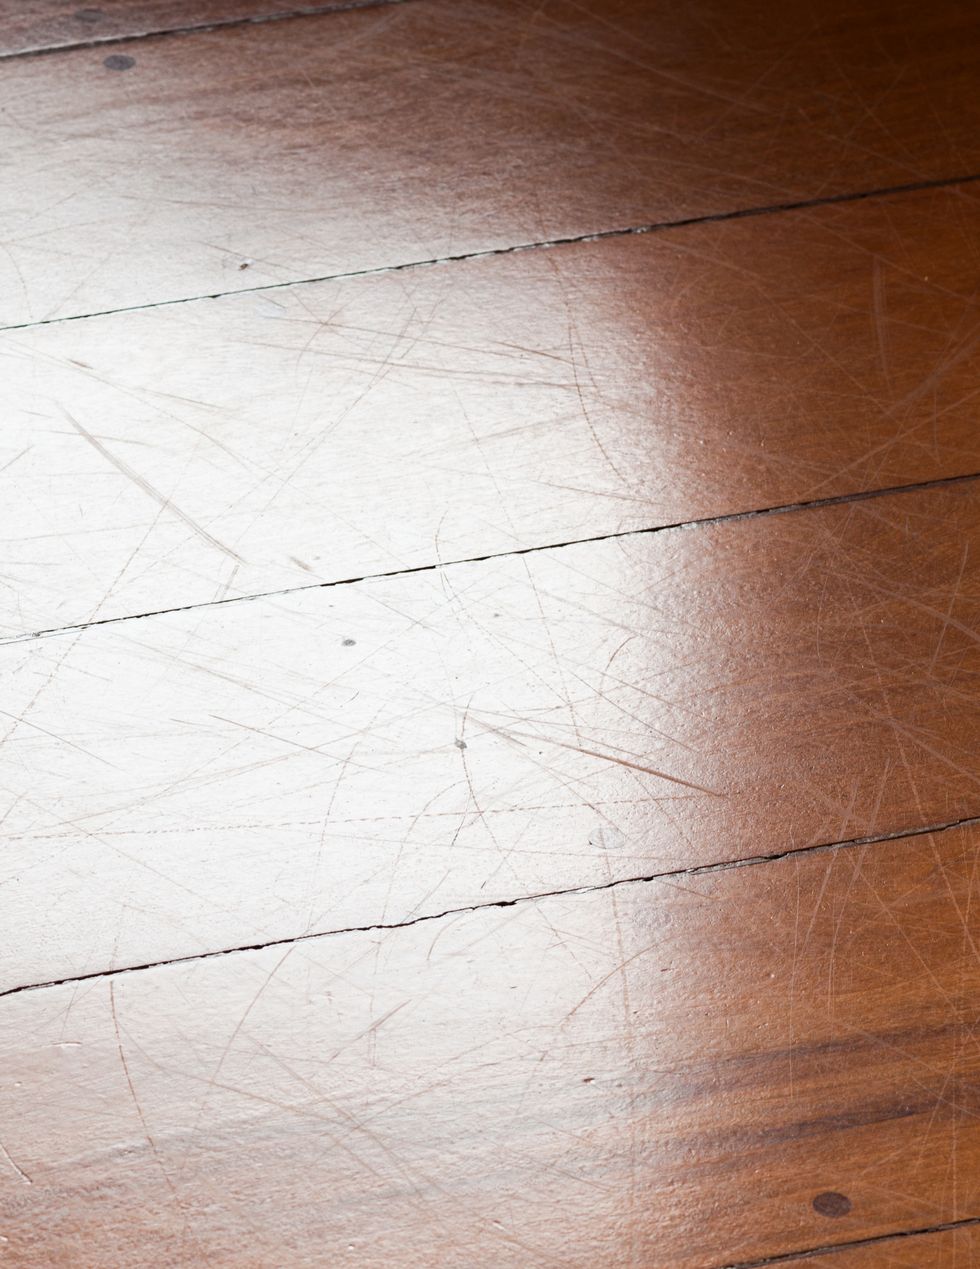 hardwood floor detail showing a lot of scratches